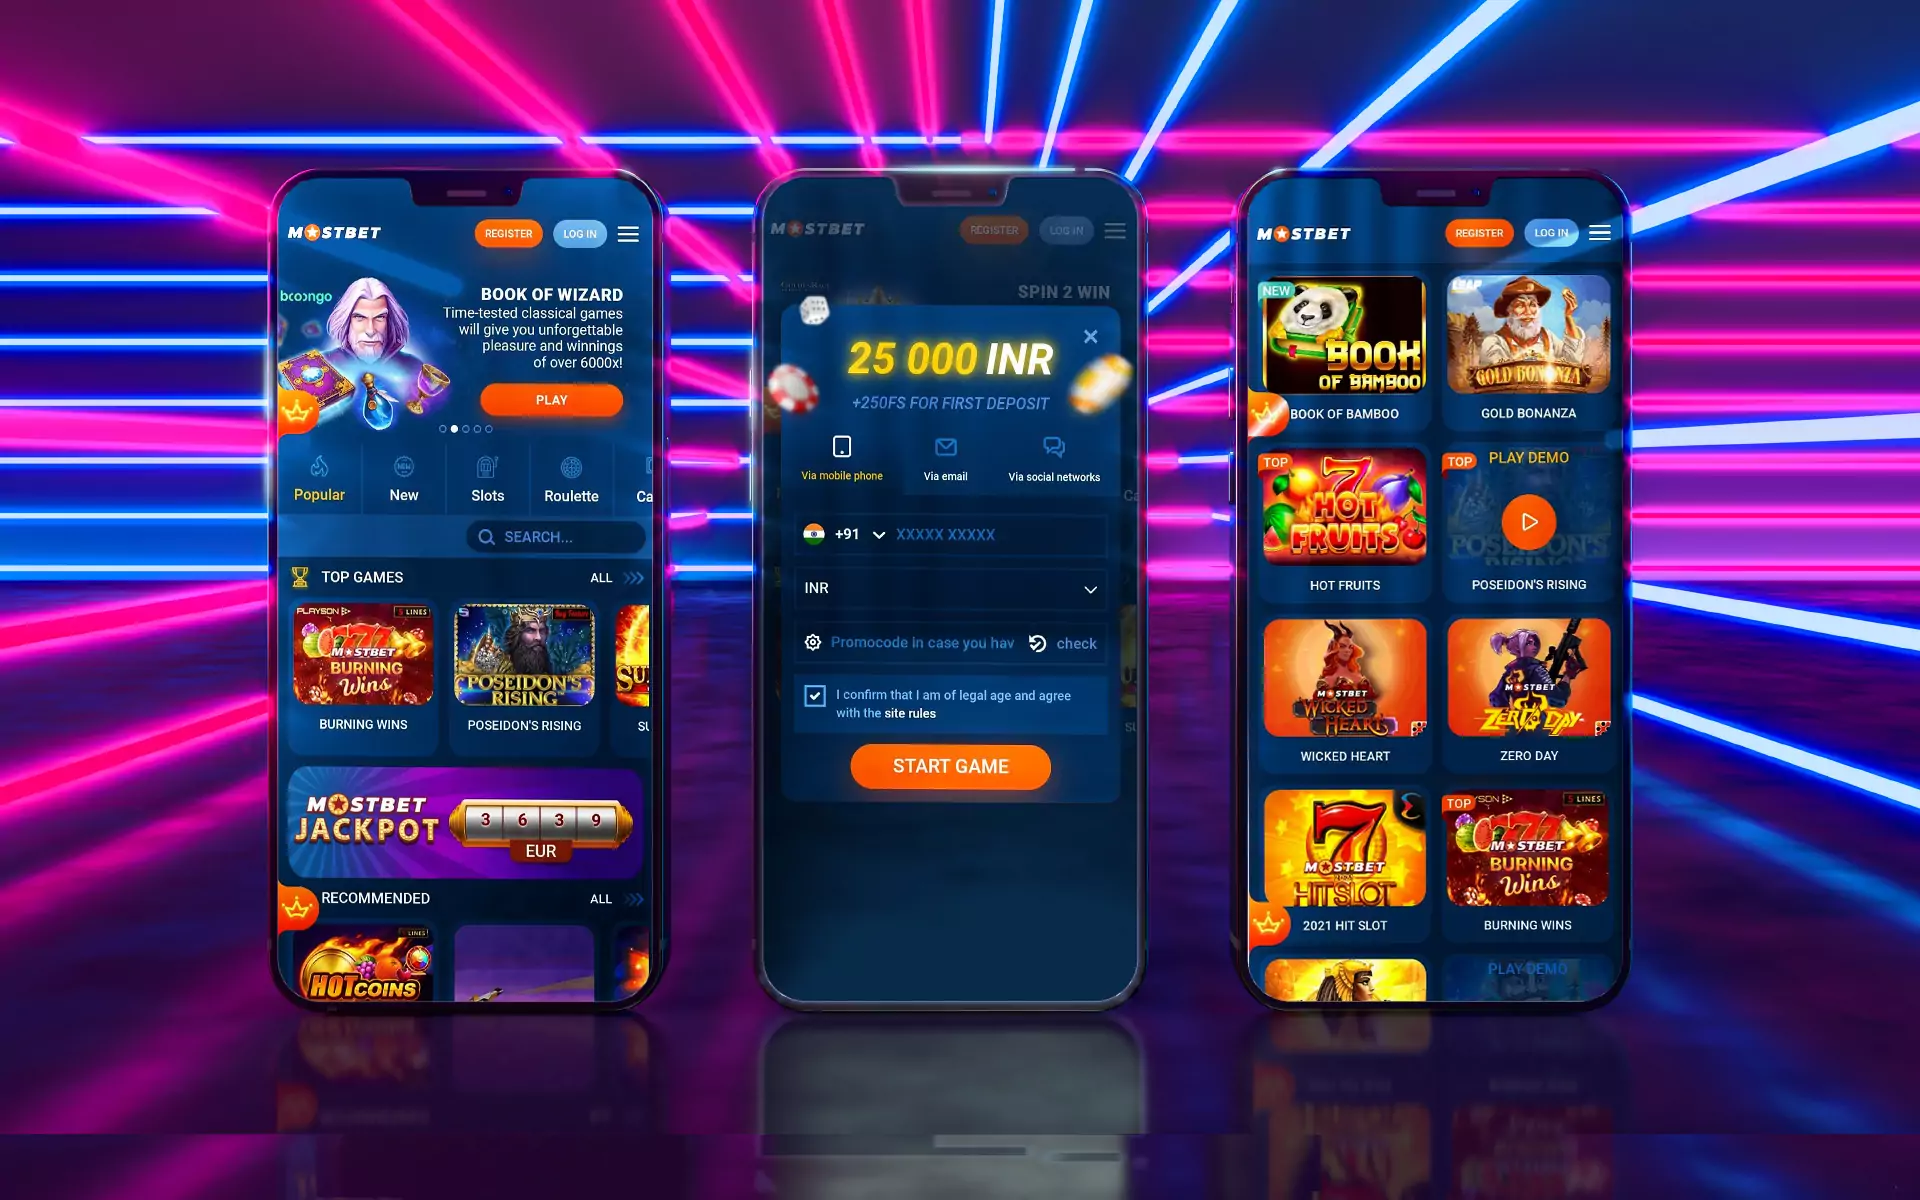 The app for iOS simplifies playing casino games using a smartphone.